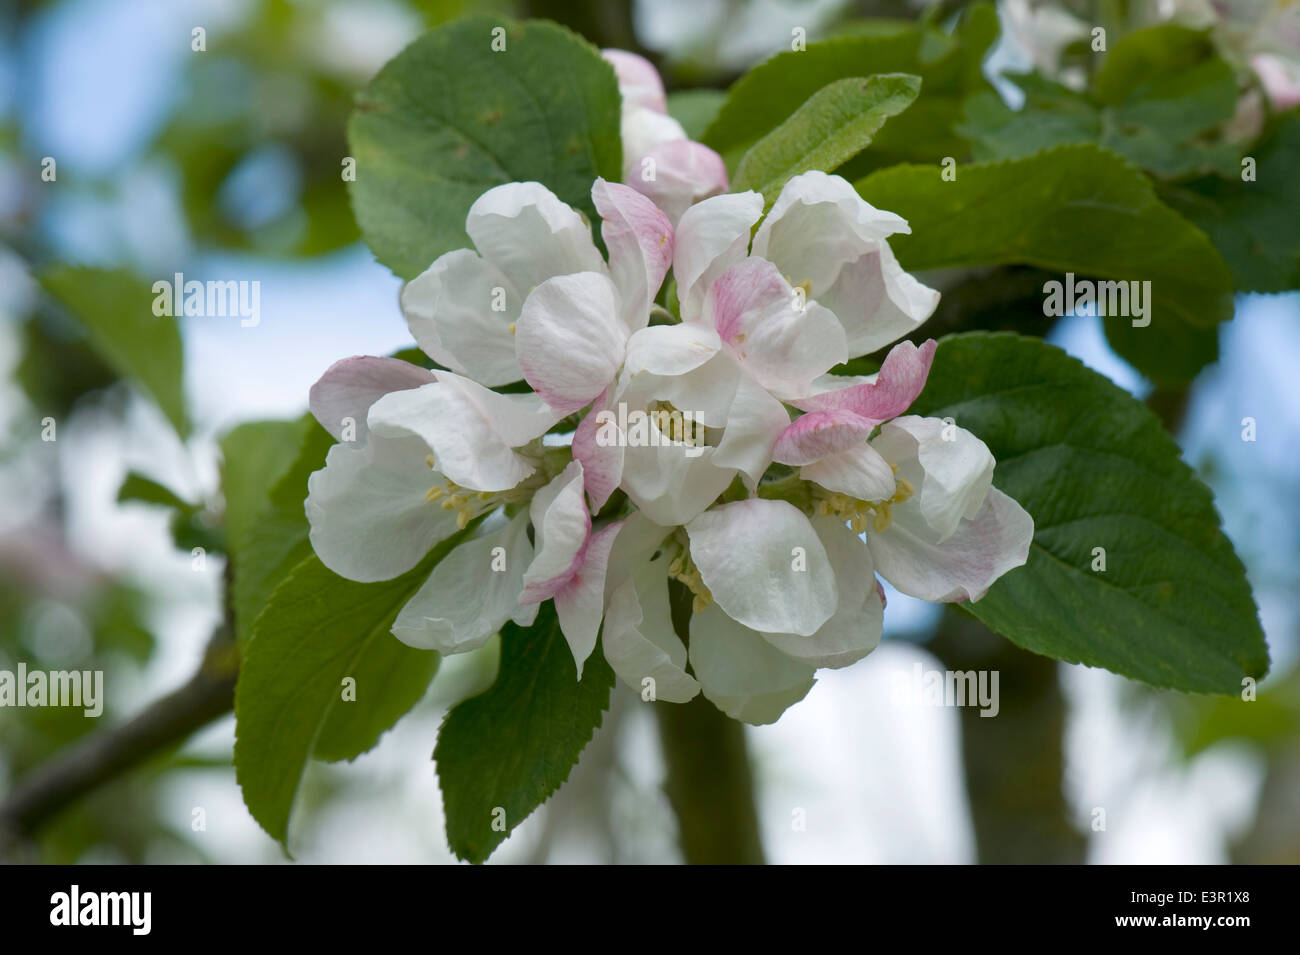 Apple blossom and new leaves on a fruit tree in spring Stock Photo